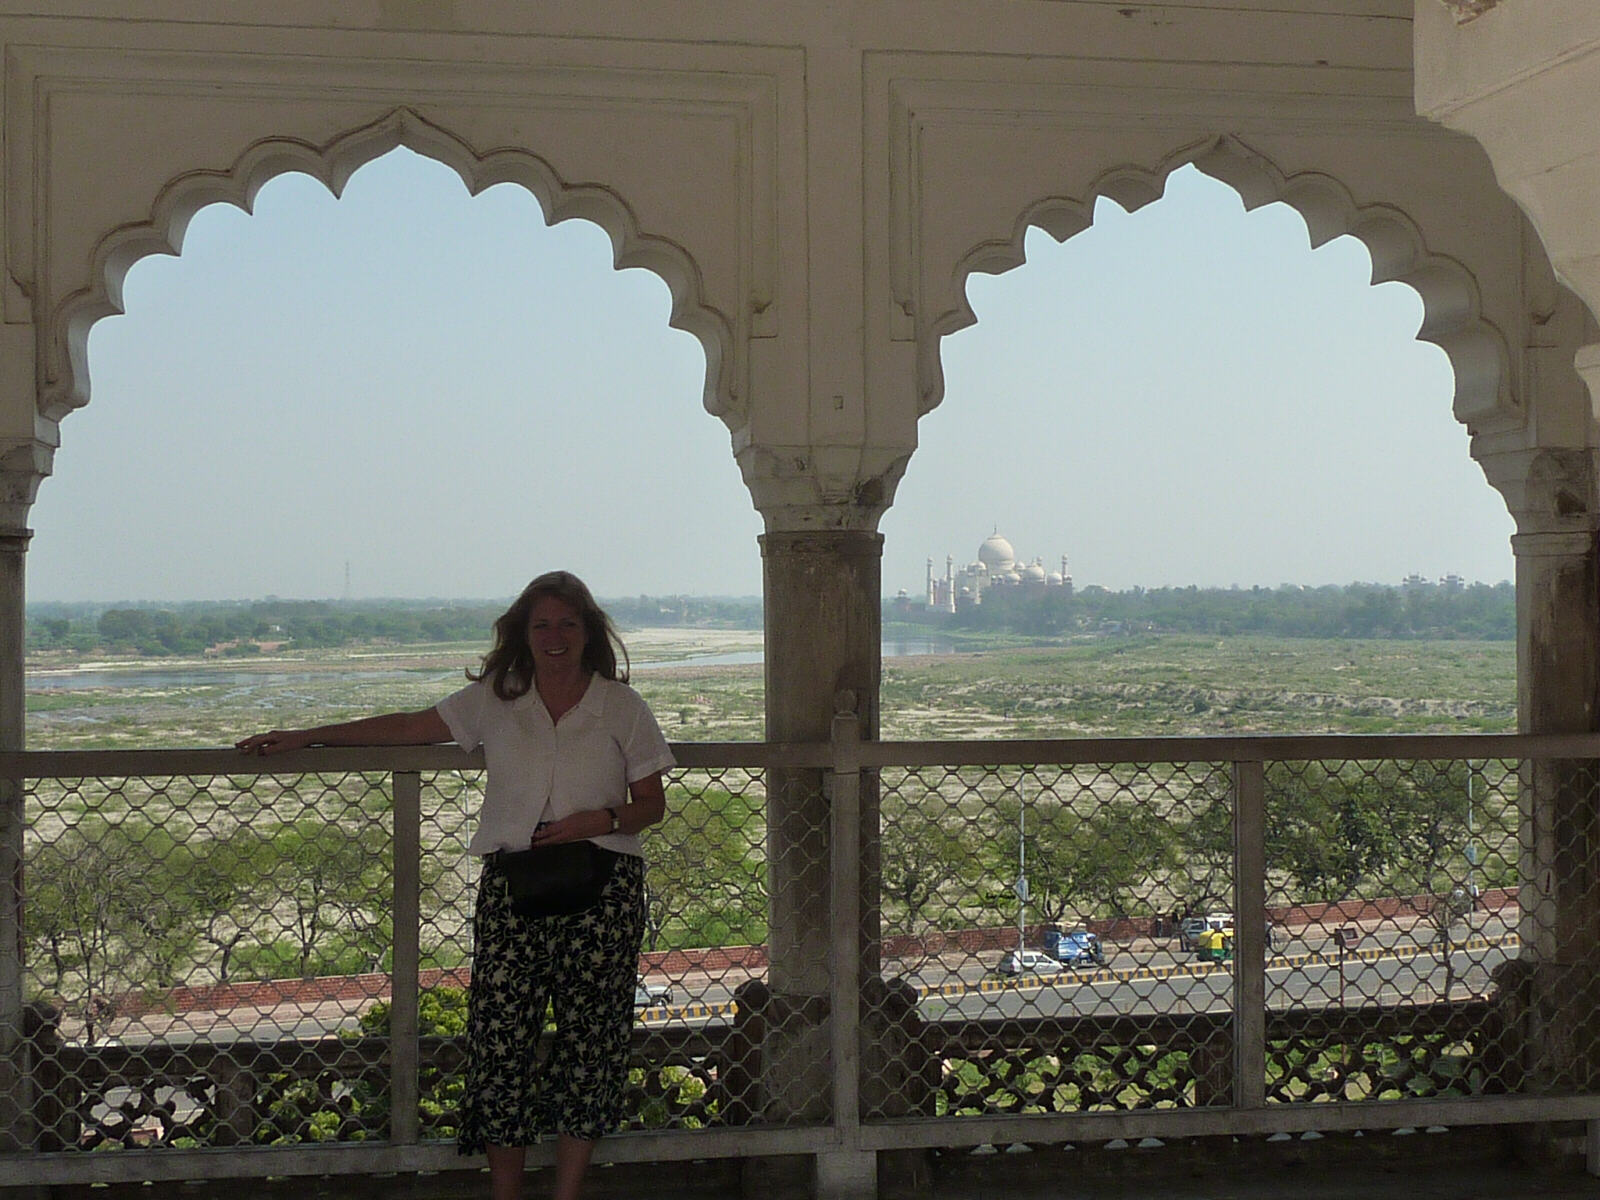 The Taj Mahal from a window in the Red Fort in Agra